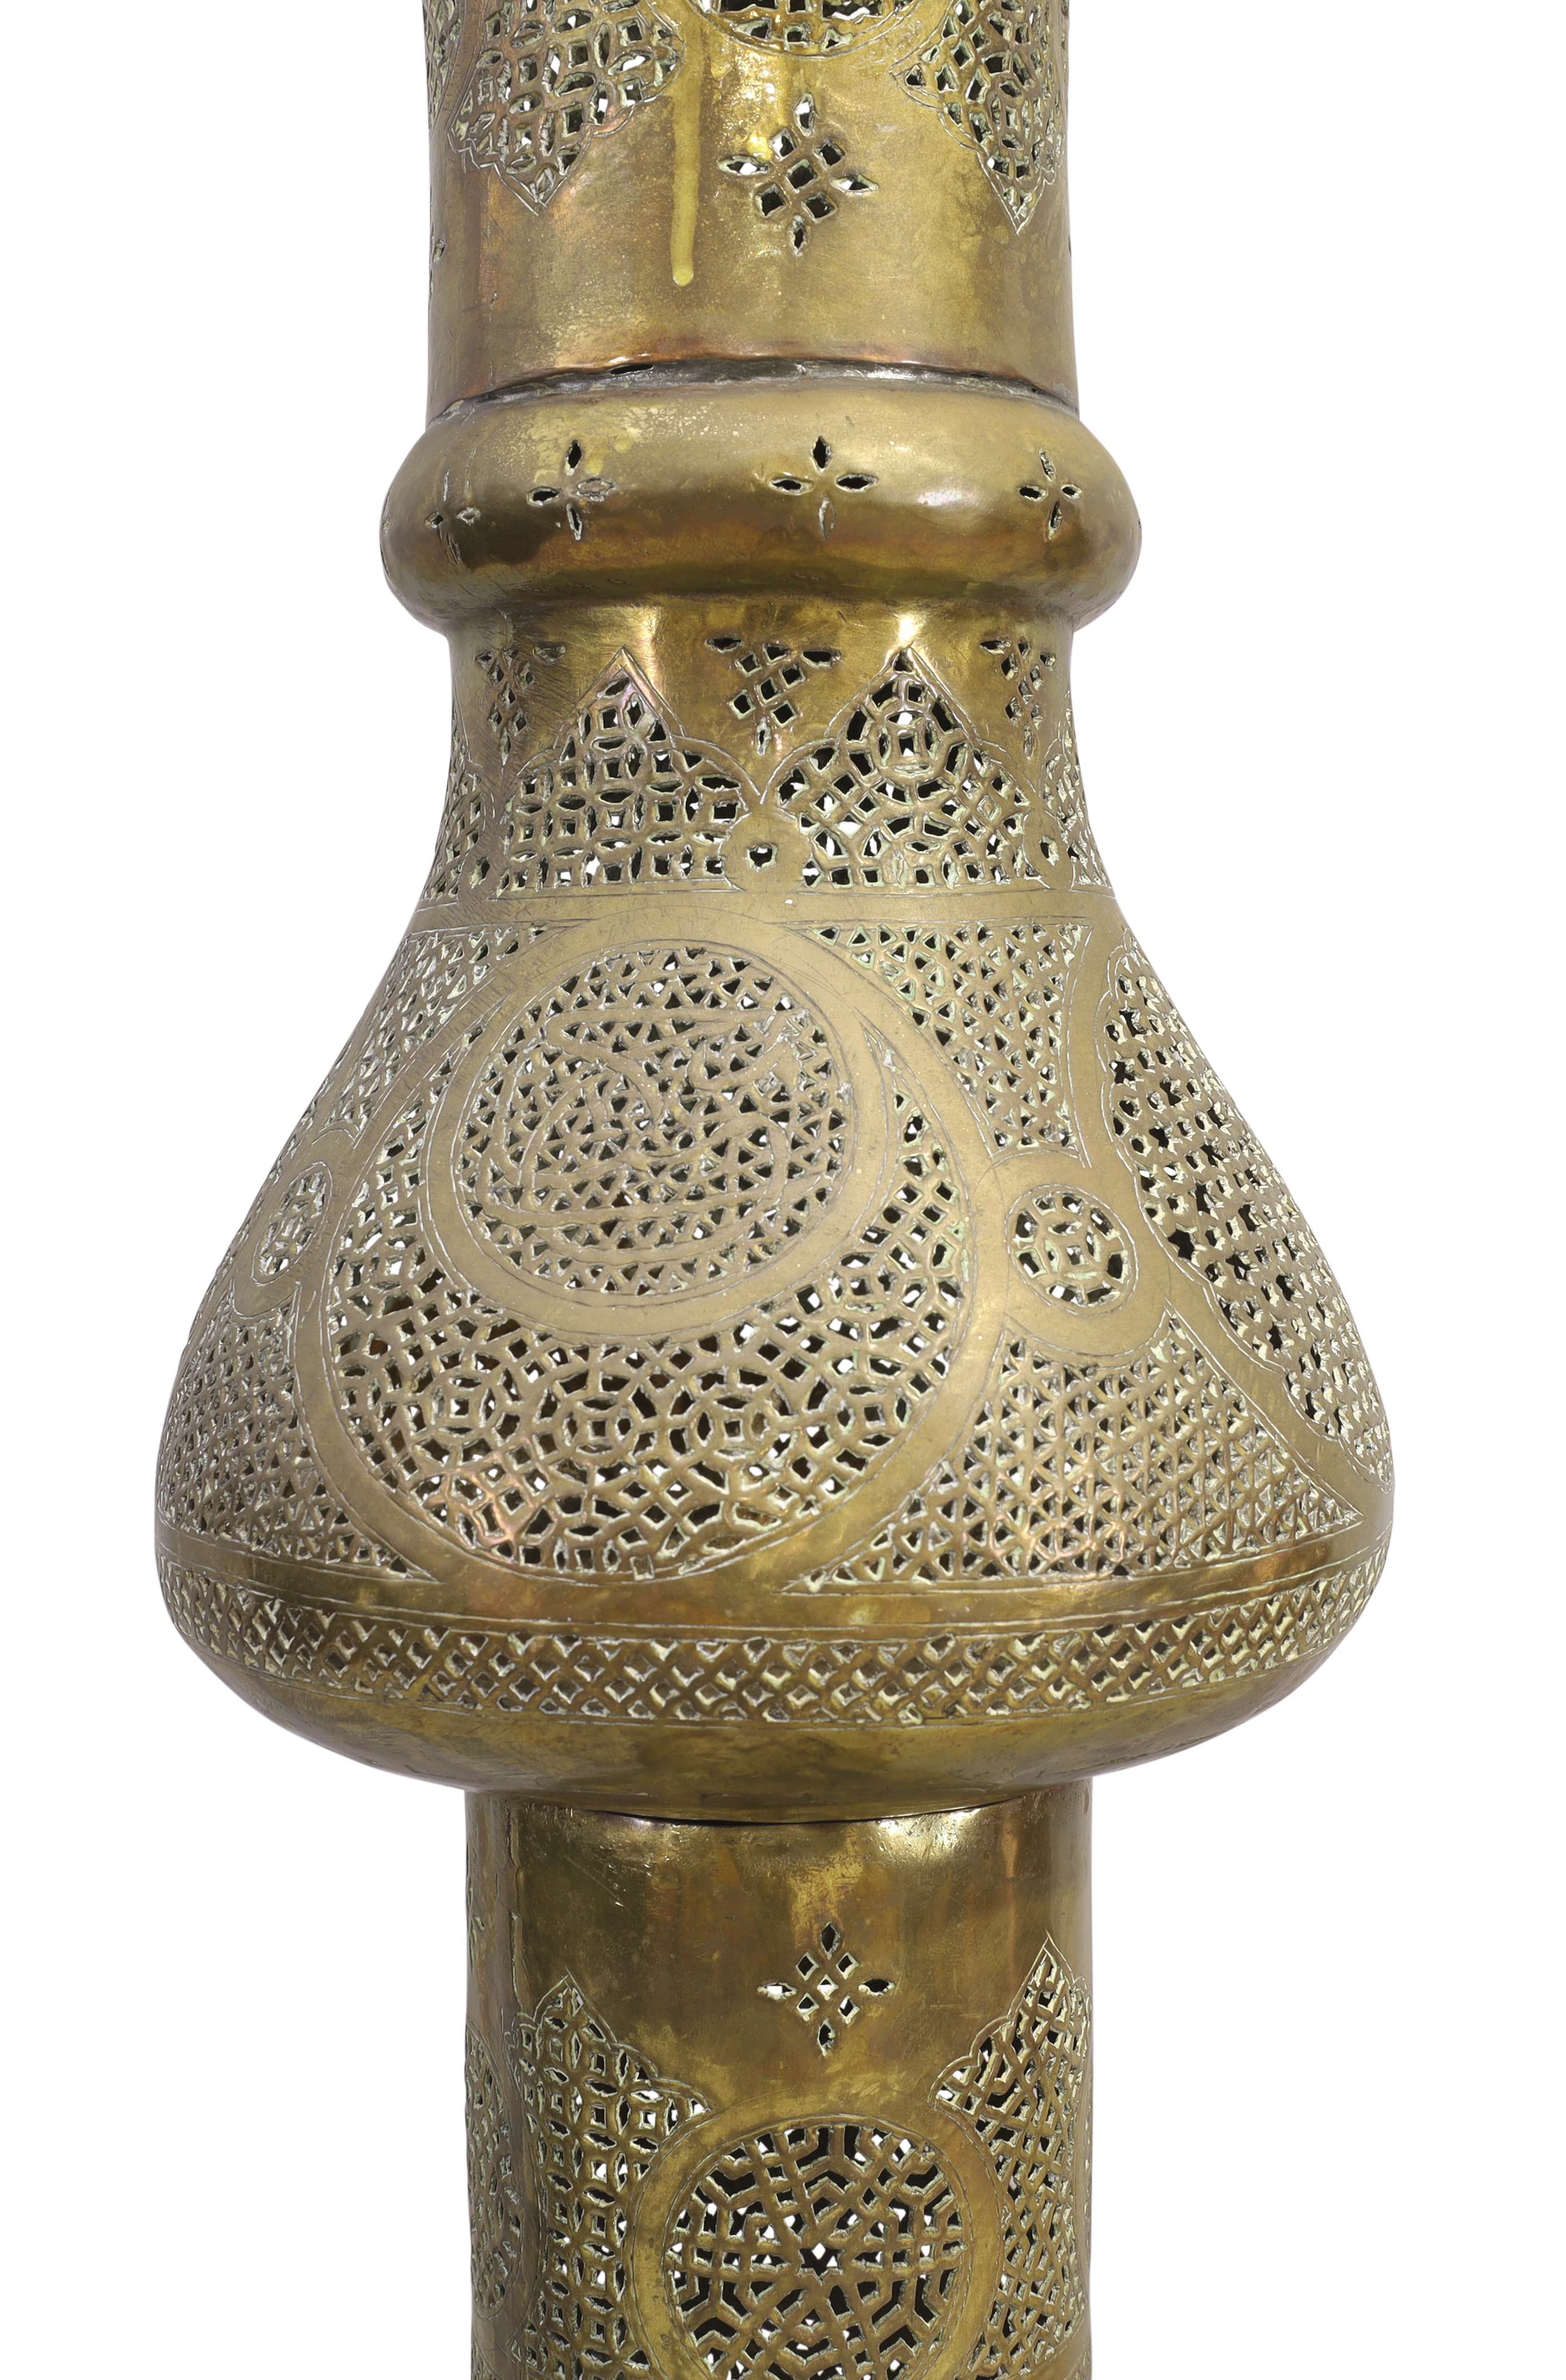 An openwork copper or copper alloy lamp stand, Turkey or Iran, 19th century, Of typical form, the... - Image 2 of 2